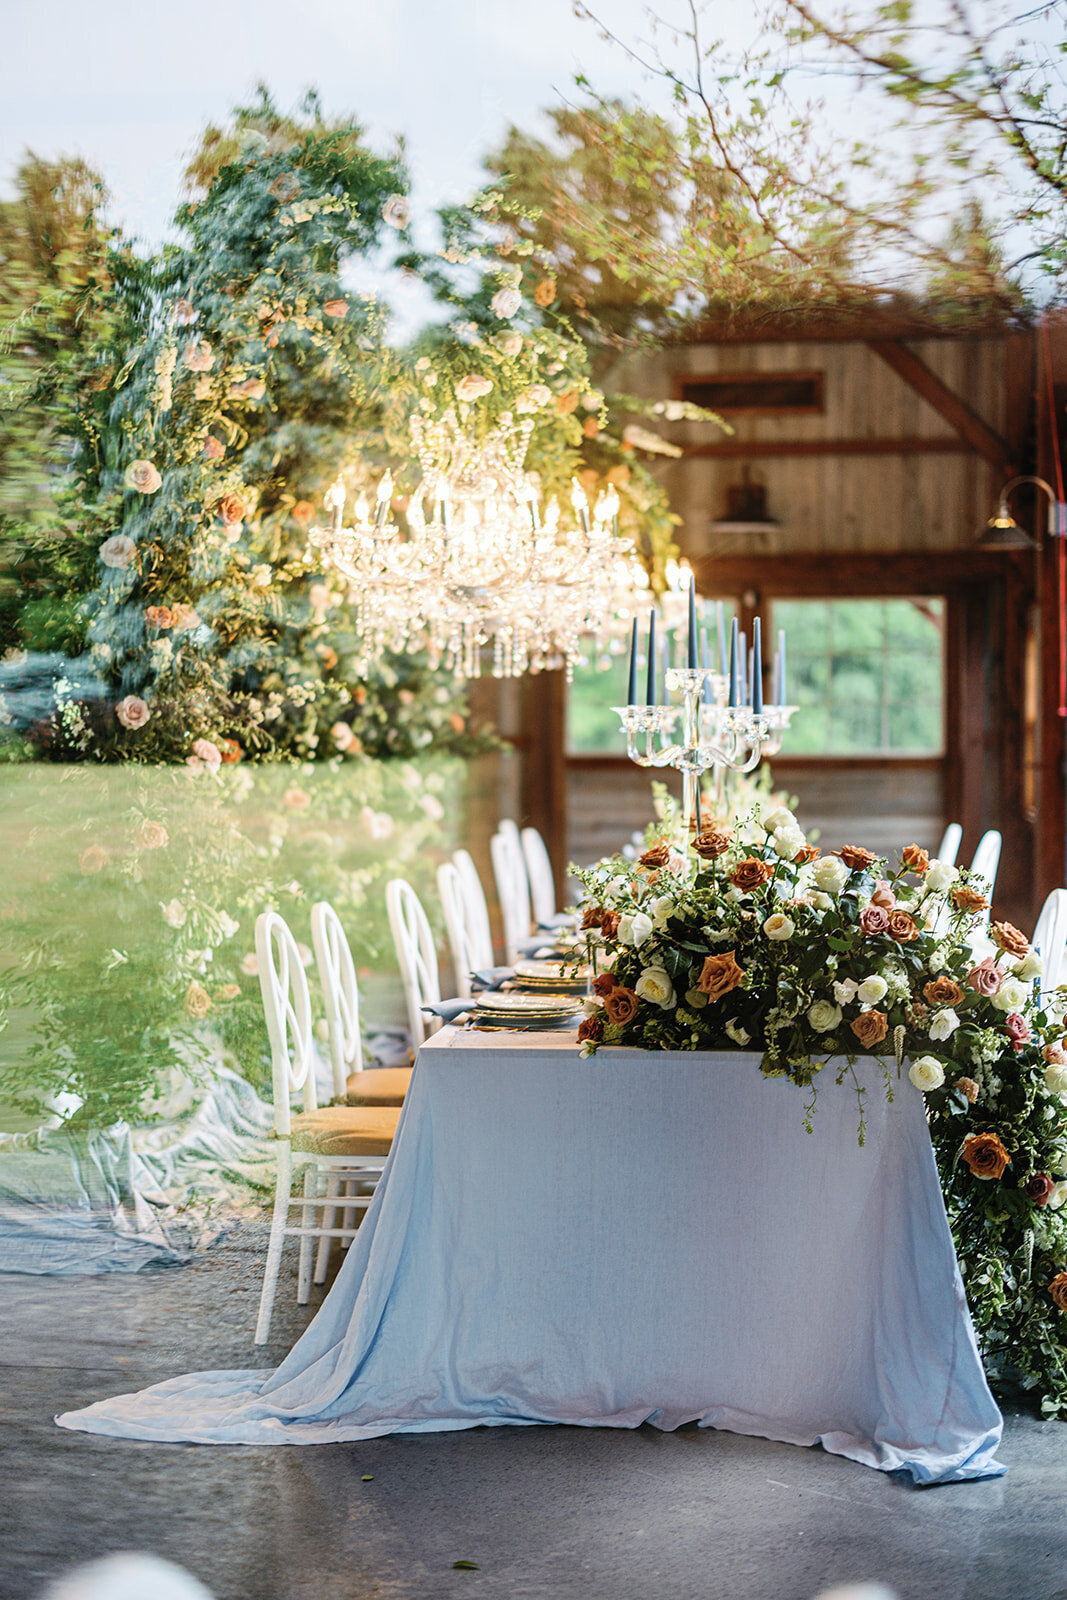 Table with long white tablecloth and large orange and green floral centerpieces